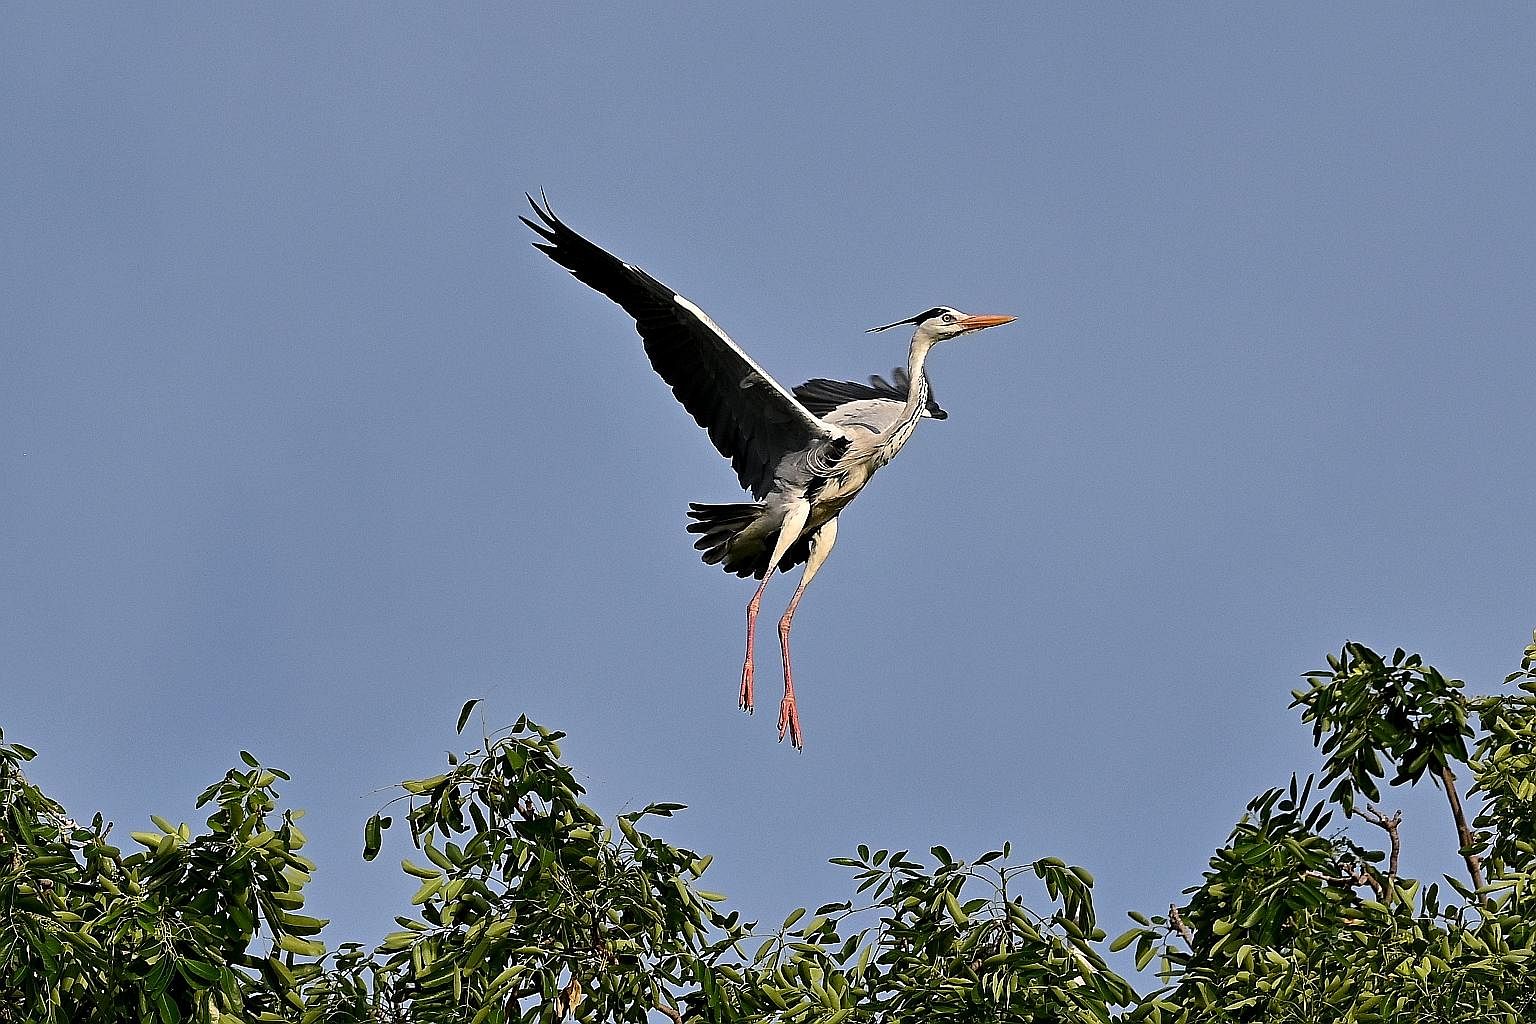 GREY HERON, PASIR RIS PARK:The most common of herons in Singapore is recognised through its grey upperparts and black streaks down its neck. During breeding, its legs and bill change from yellow to a bright reddish-orange. RED-TAILED RACER, RIFLE RAN